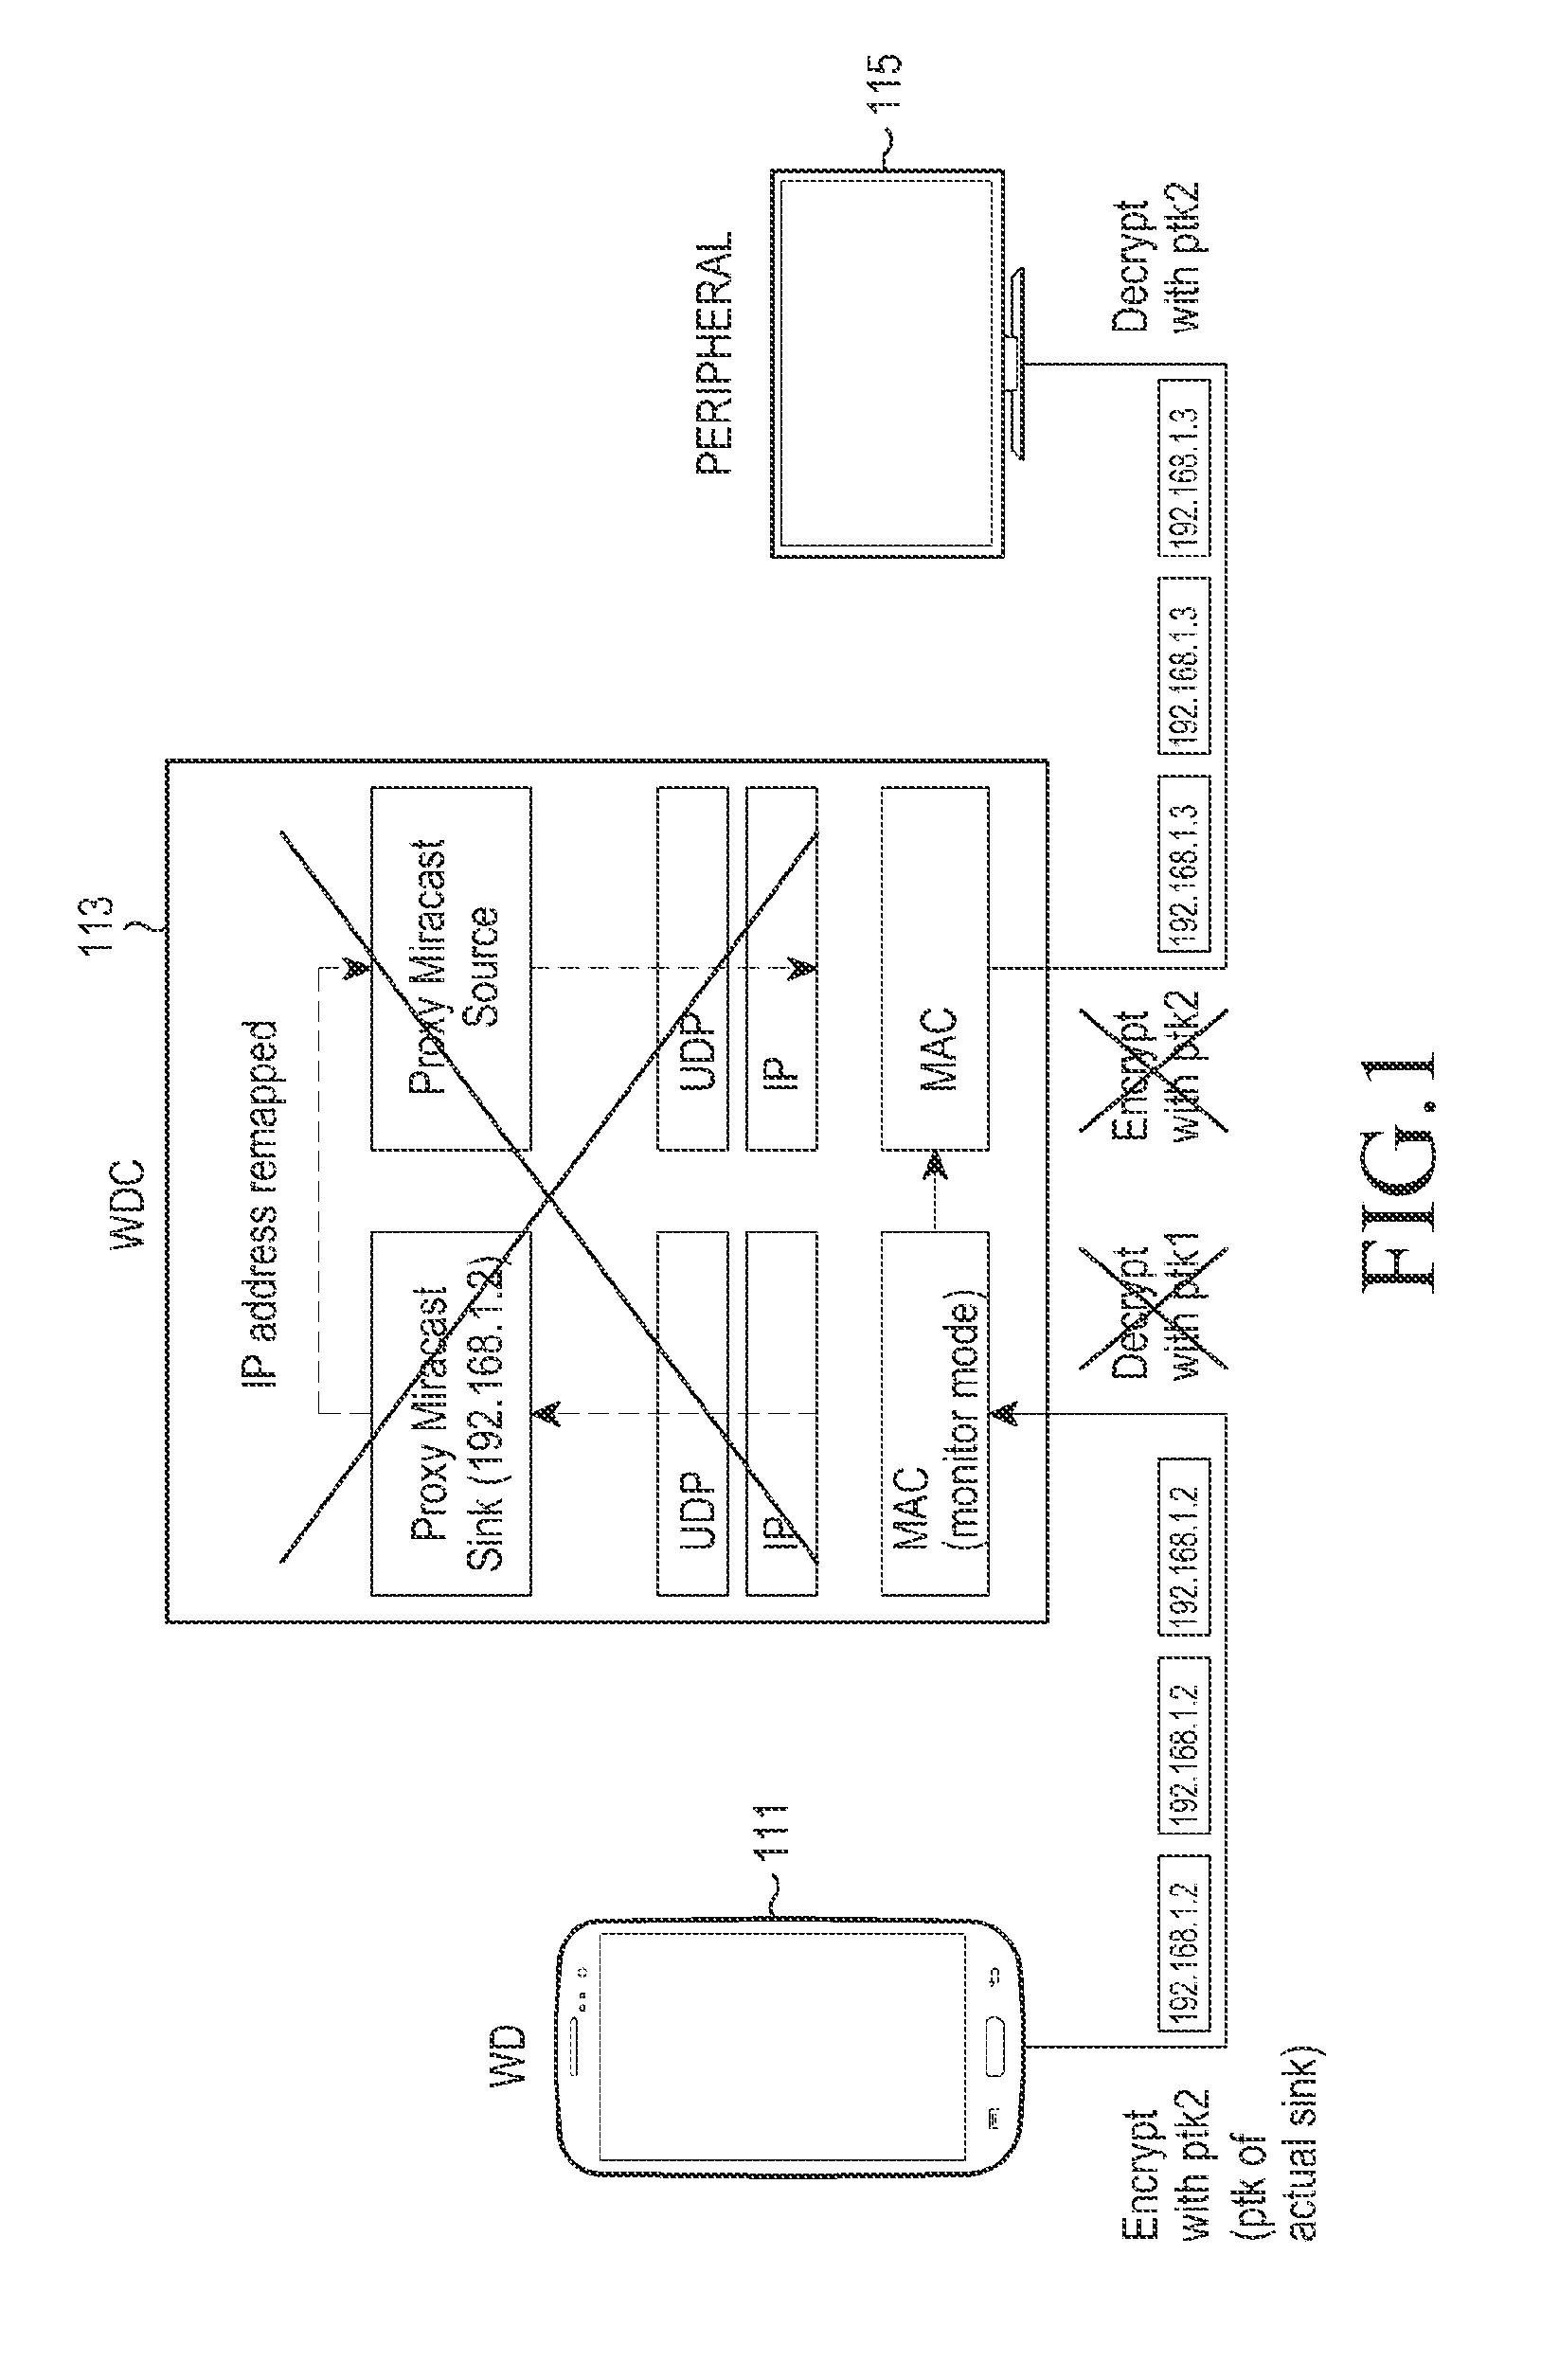 Apparatus and method for controlling transparent tunnel mode operation in communication system supporting wireless docking protocol